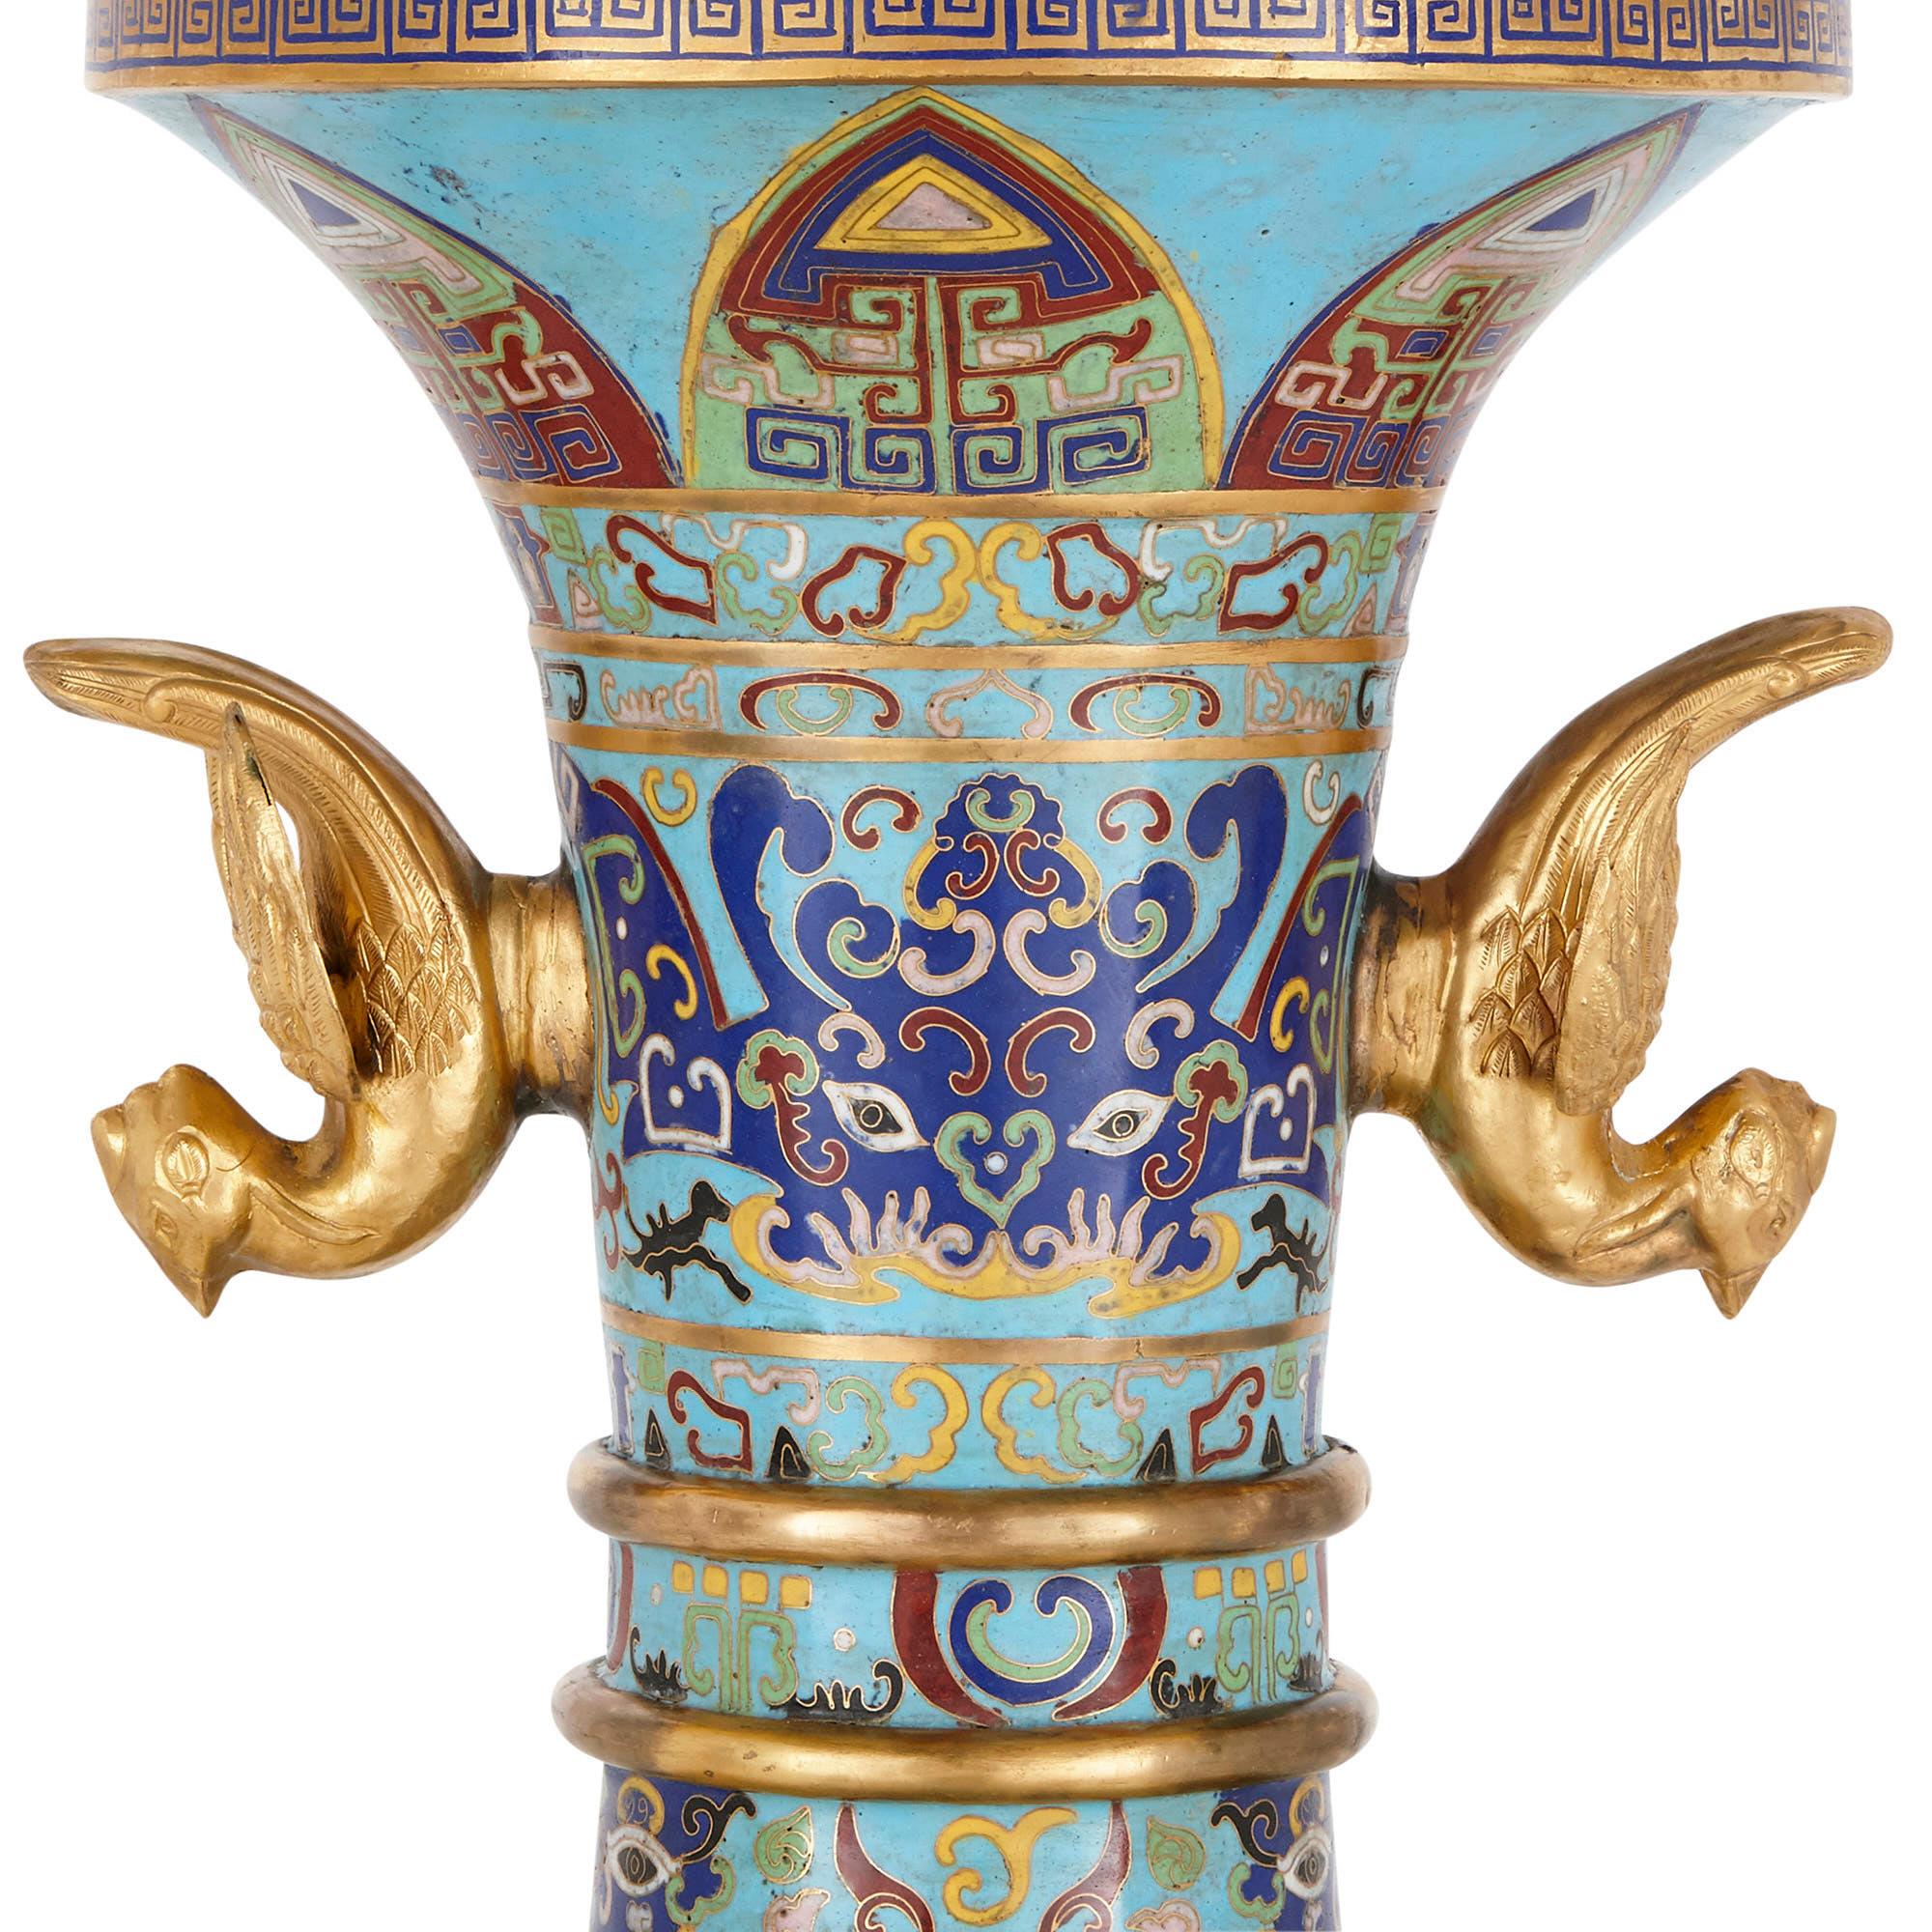 Two Chinese Gilt Bronze Mounted Cloisonné Enamel Vases In Good Condition For Sale In London, GB